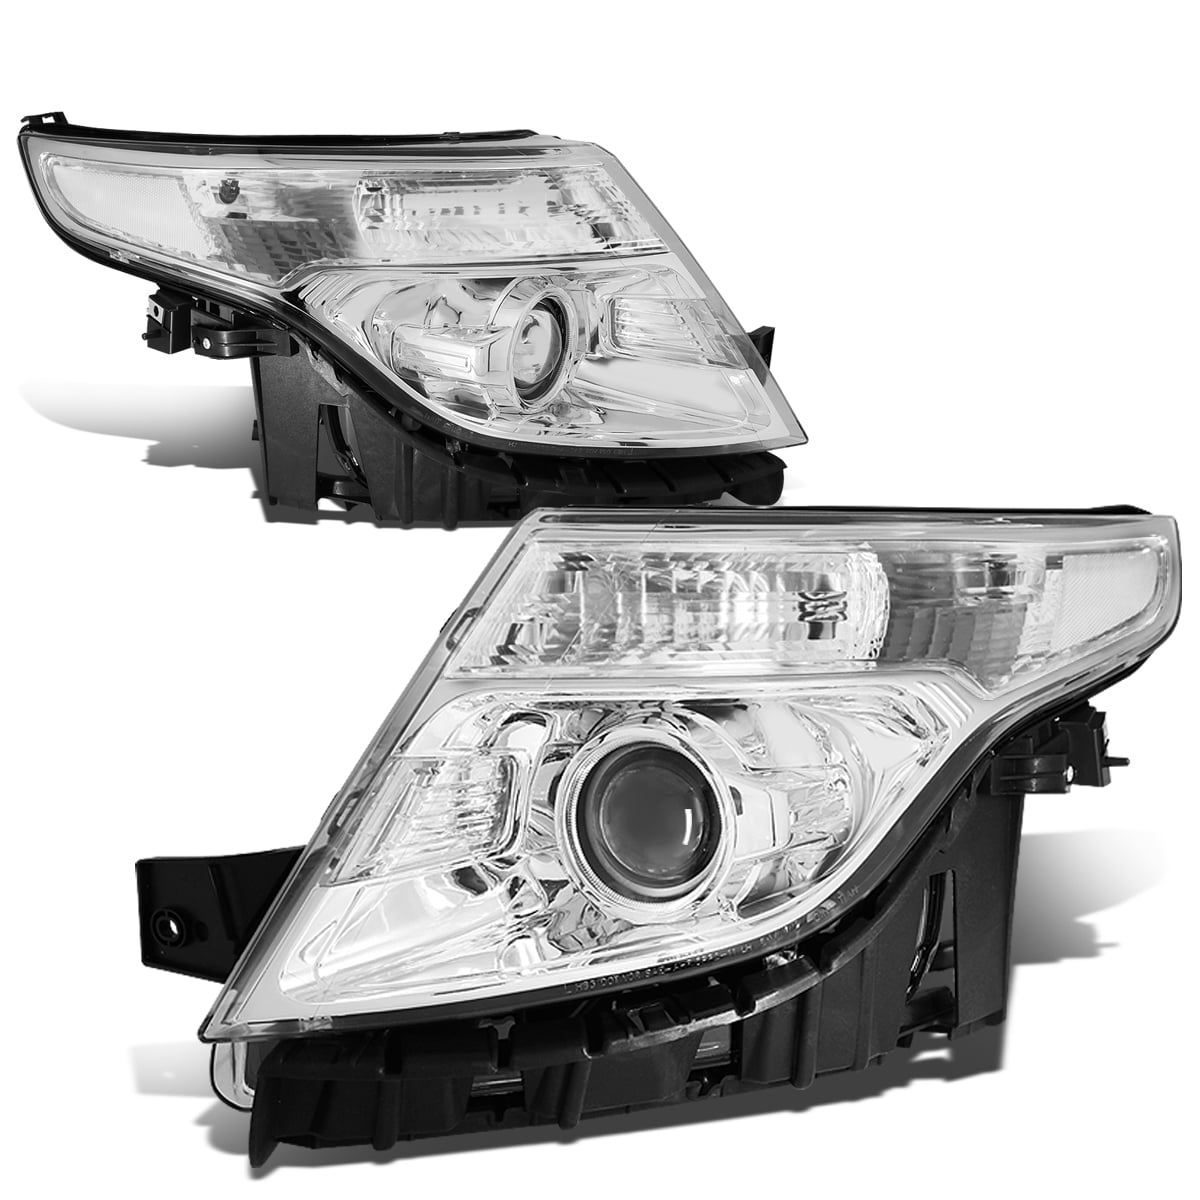 For 11-15 Ford Explorer Projector Headlight/Lamp Replacement Clear Side Chrome 